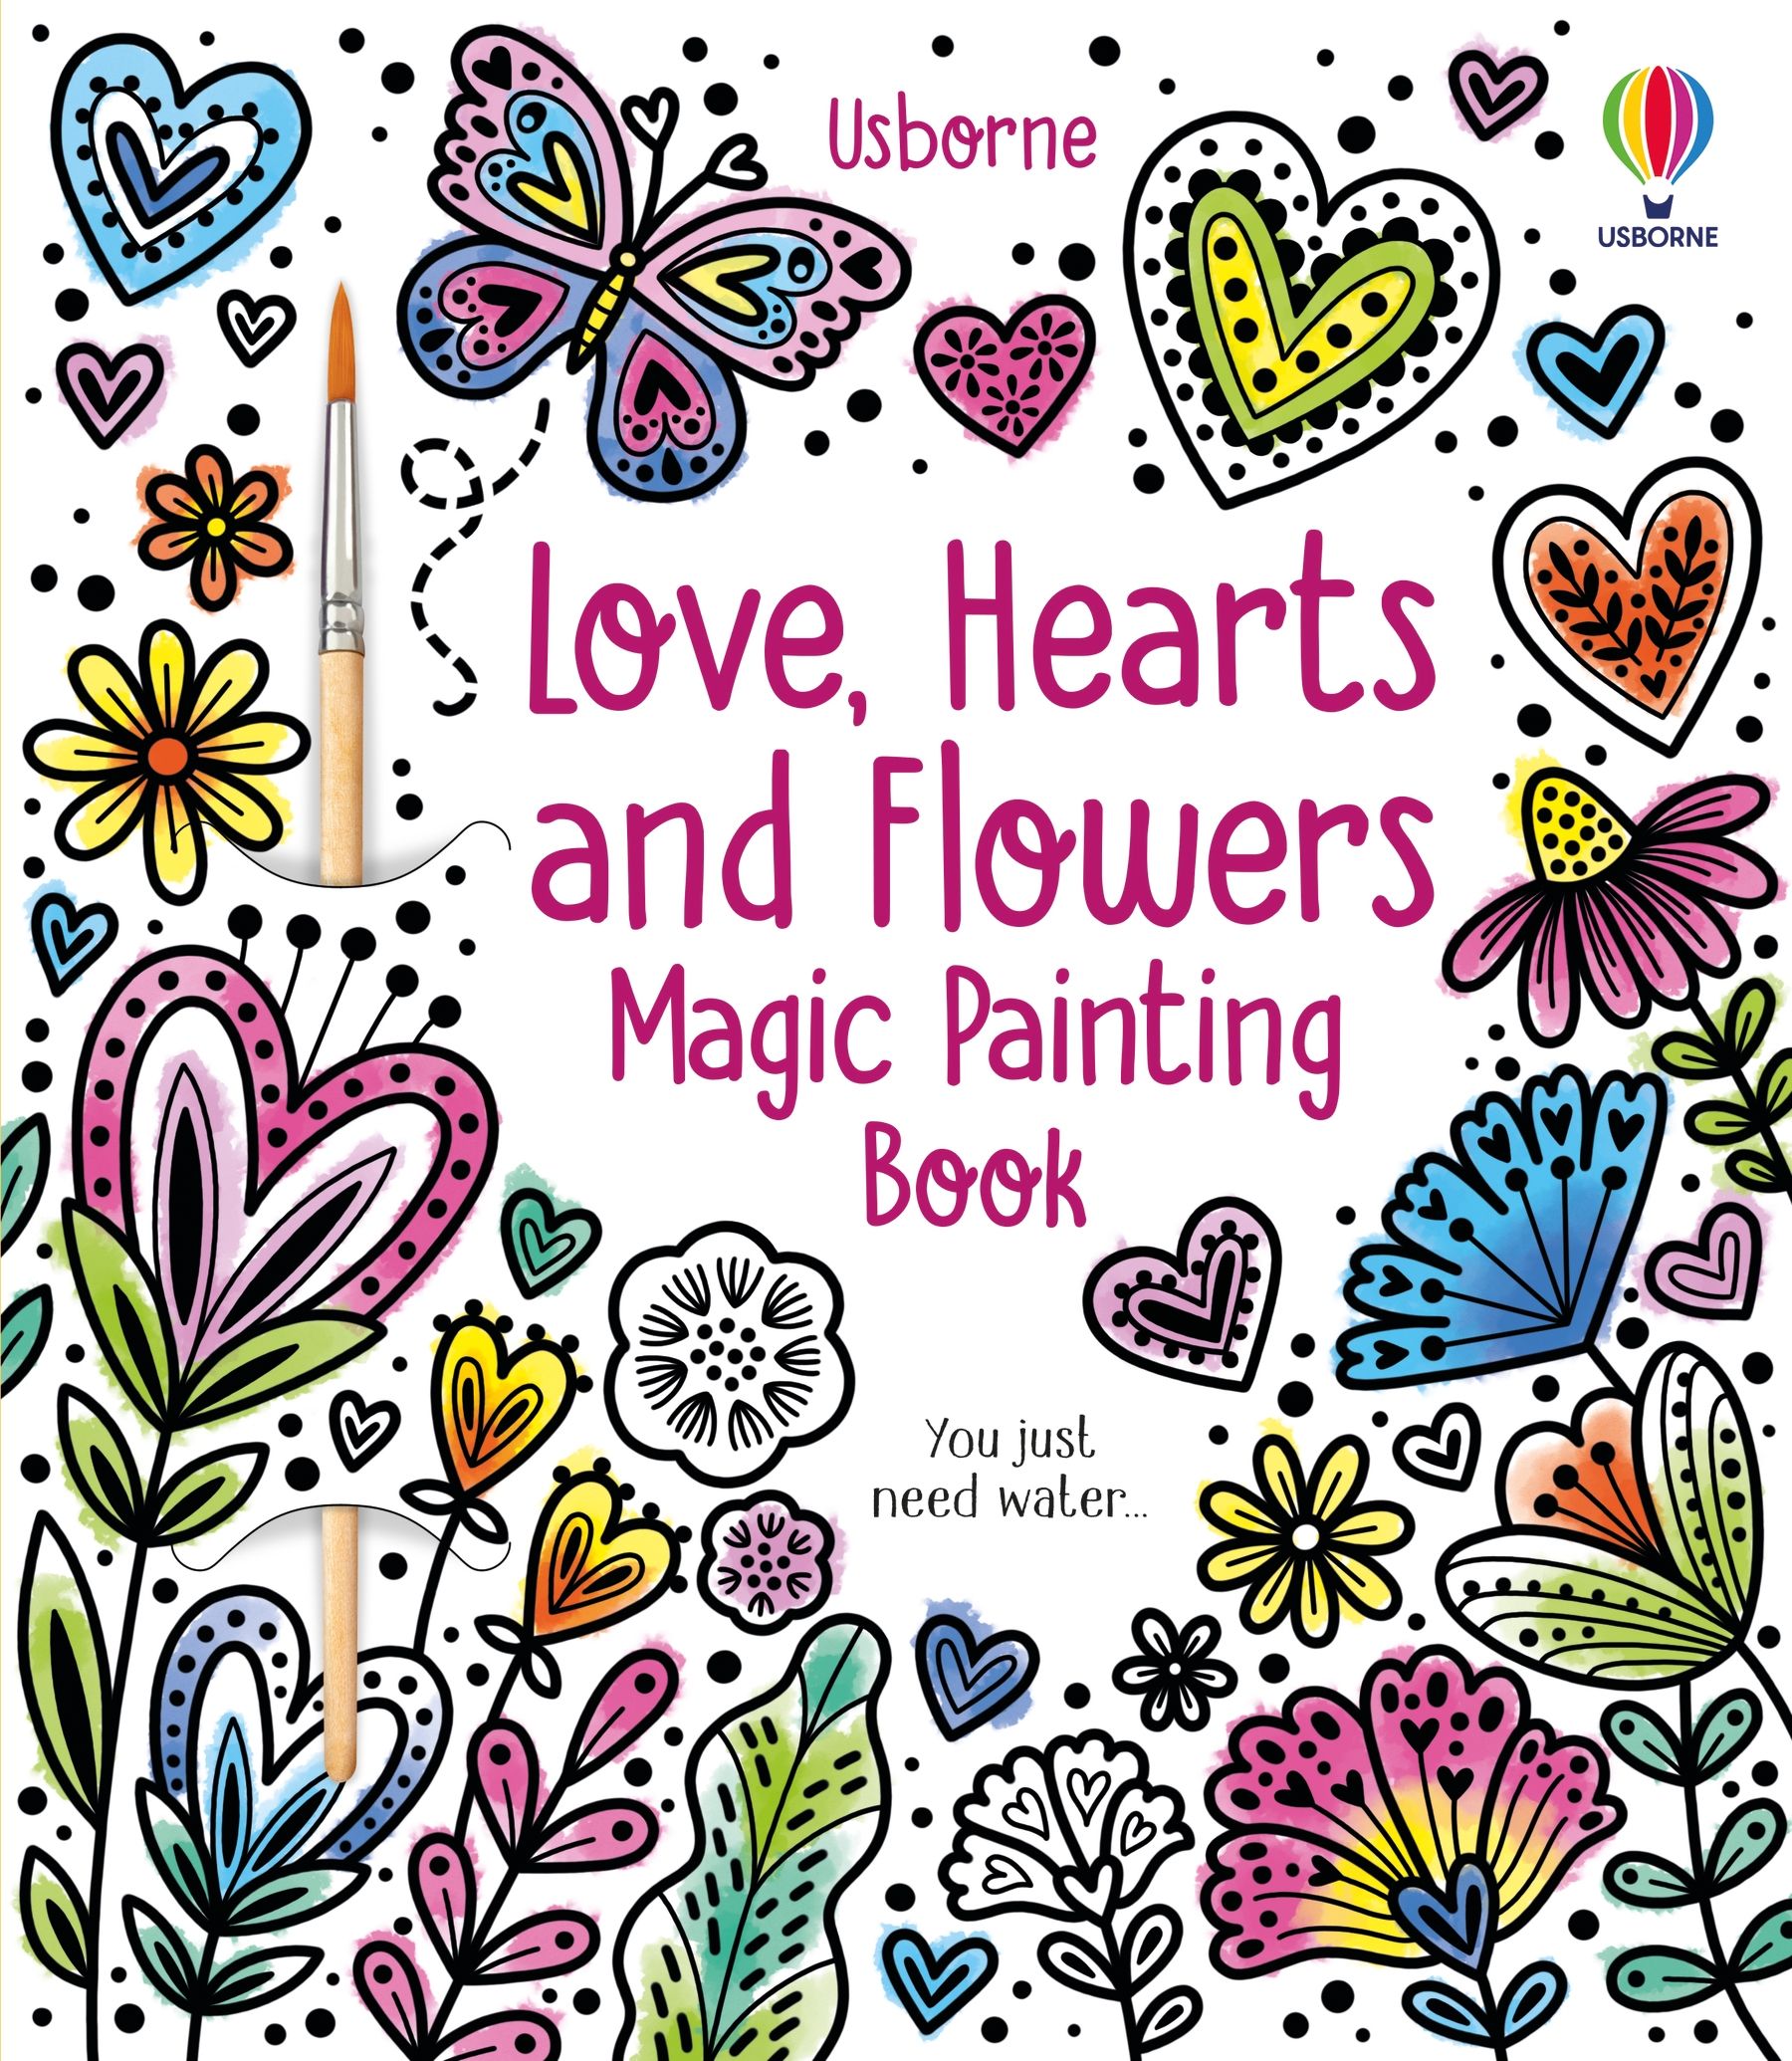 Usborne Books | Magic Painting Book - Love, Hearts and Flowers